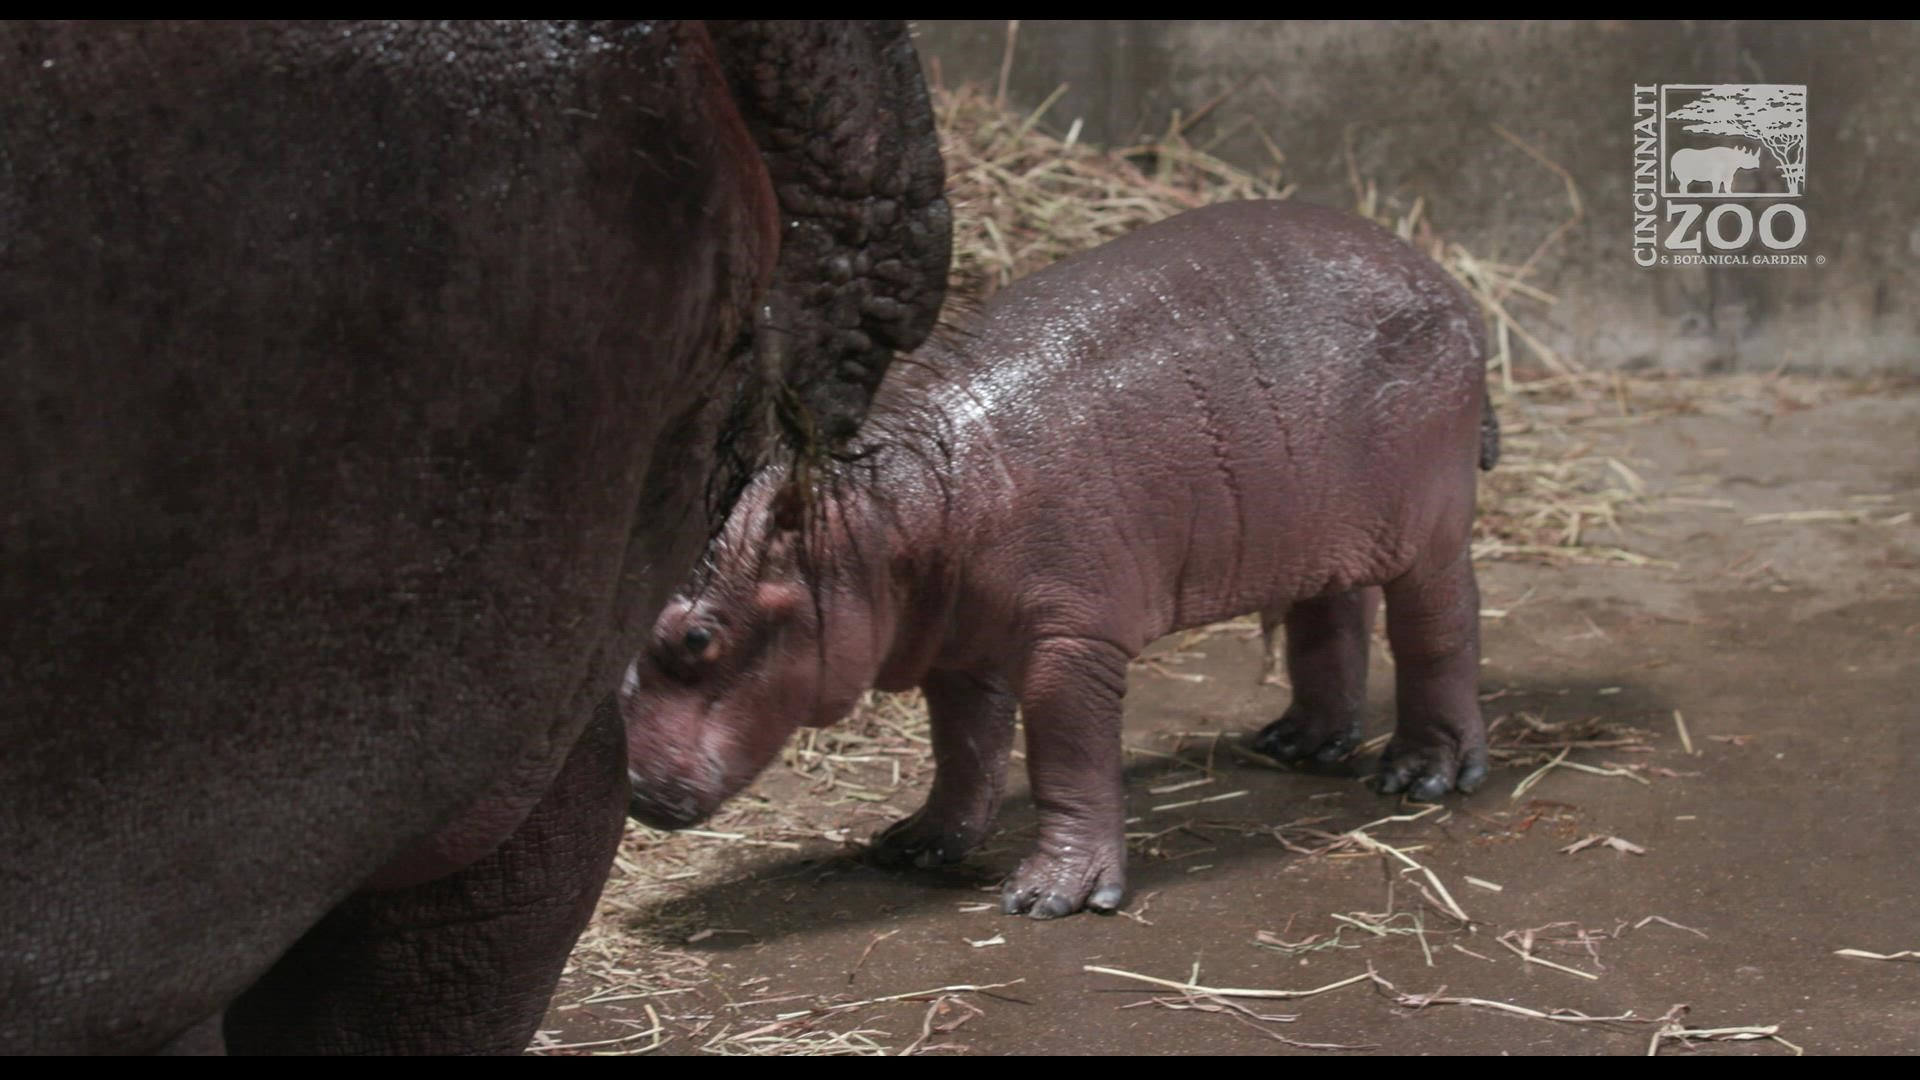 Keepers at the Cincinnati Zoo & Botanical Garden revealed Monday that the new hippopotamus calf born last week is a boy.